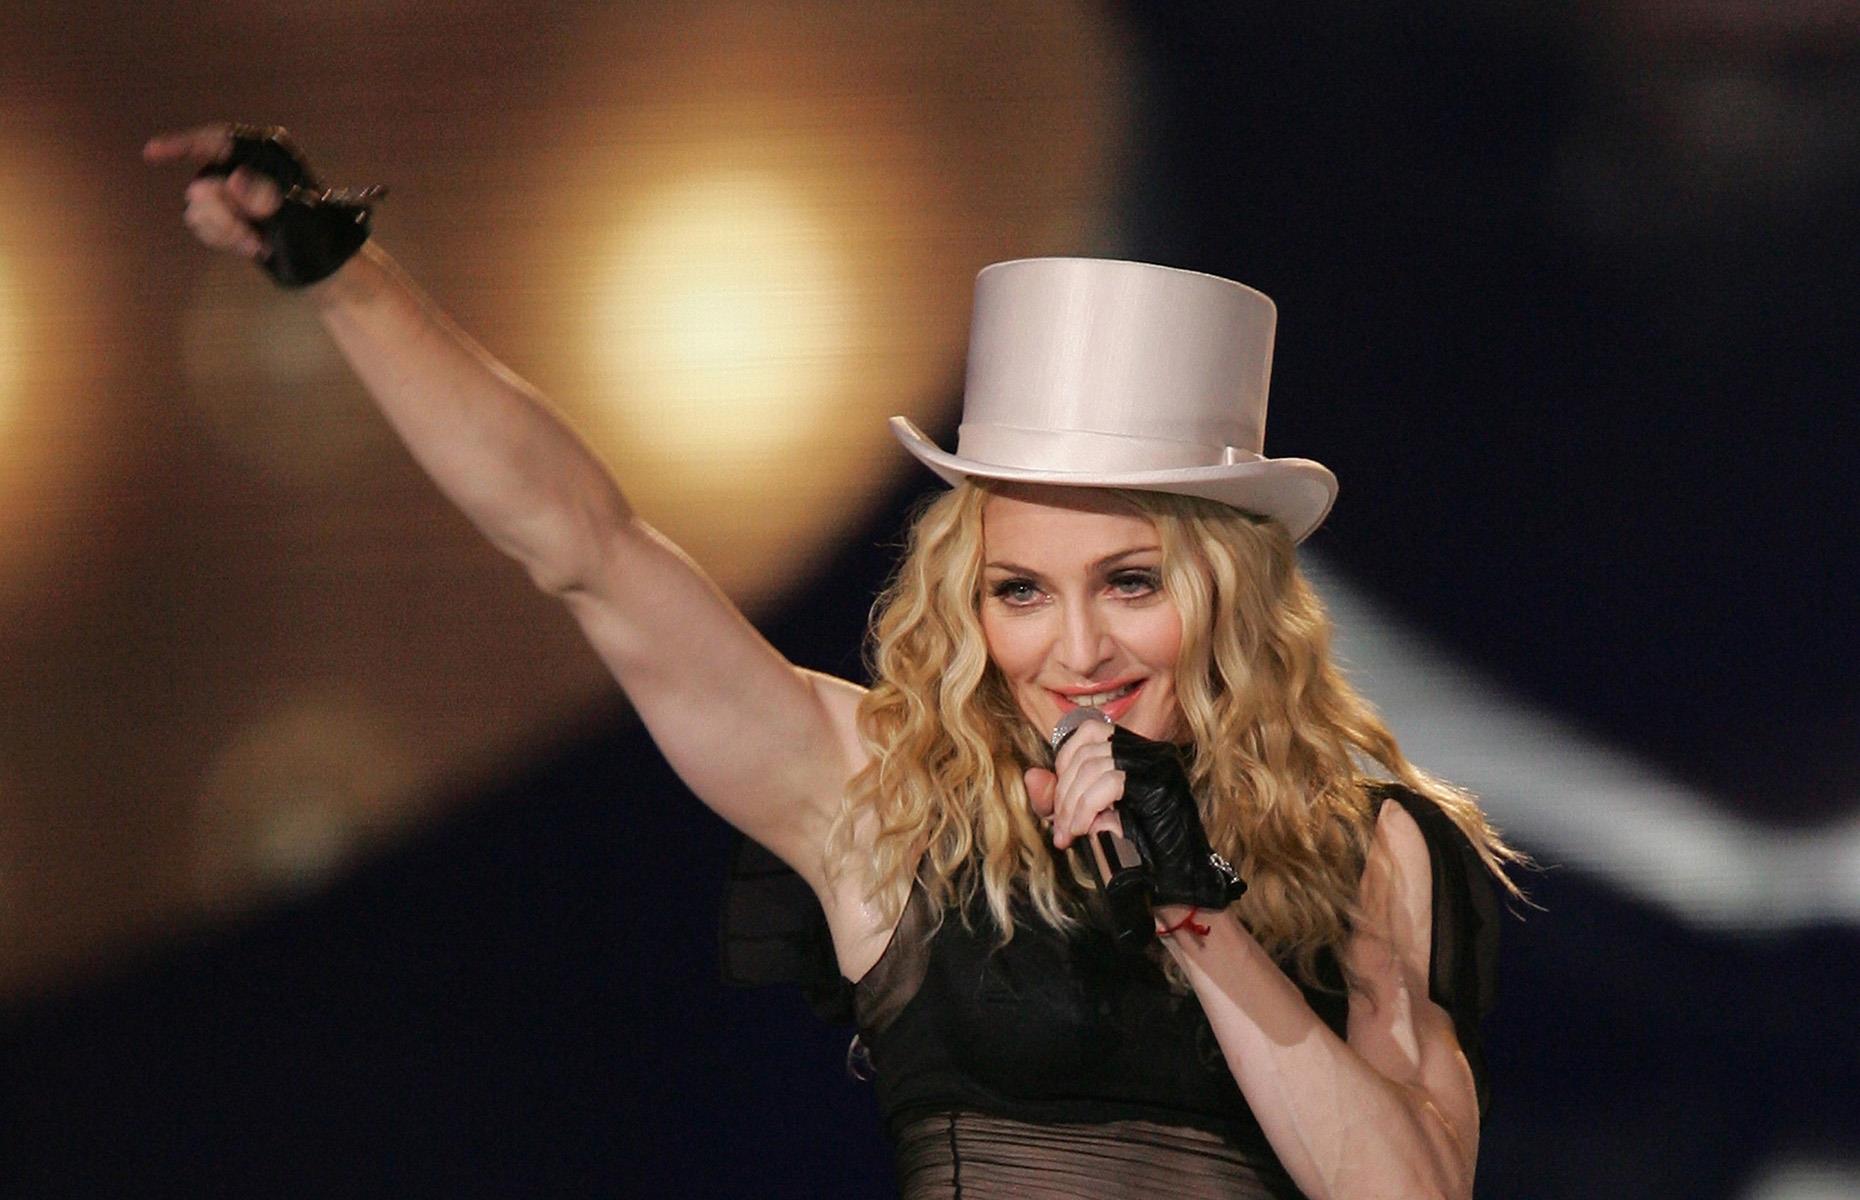 <p>Madonna embarked on her electrifying <em>Sticky & Sweet Tour</em> in 2008, performing 85 shows across five legs, and enthralling over 3.5 million lucky ticket holders around the world. </p>  <p>The tour is the Queen of Pop's highest-grossing to date, making $407 million (or $603m today). At the time, it was the highest-grossing tour for a solo artist.</p>  <p>Madonna recently made history as the only female musician to achieve six tours that have each grossed over $100 million. Her <em>Celebration Tour</em>, which concluded in May 2024, grossed a respectable $225 million. </p>